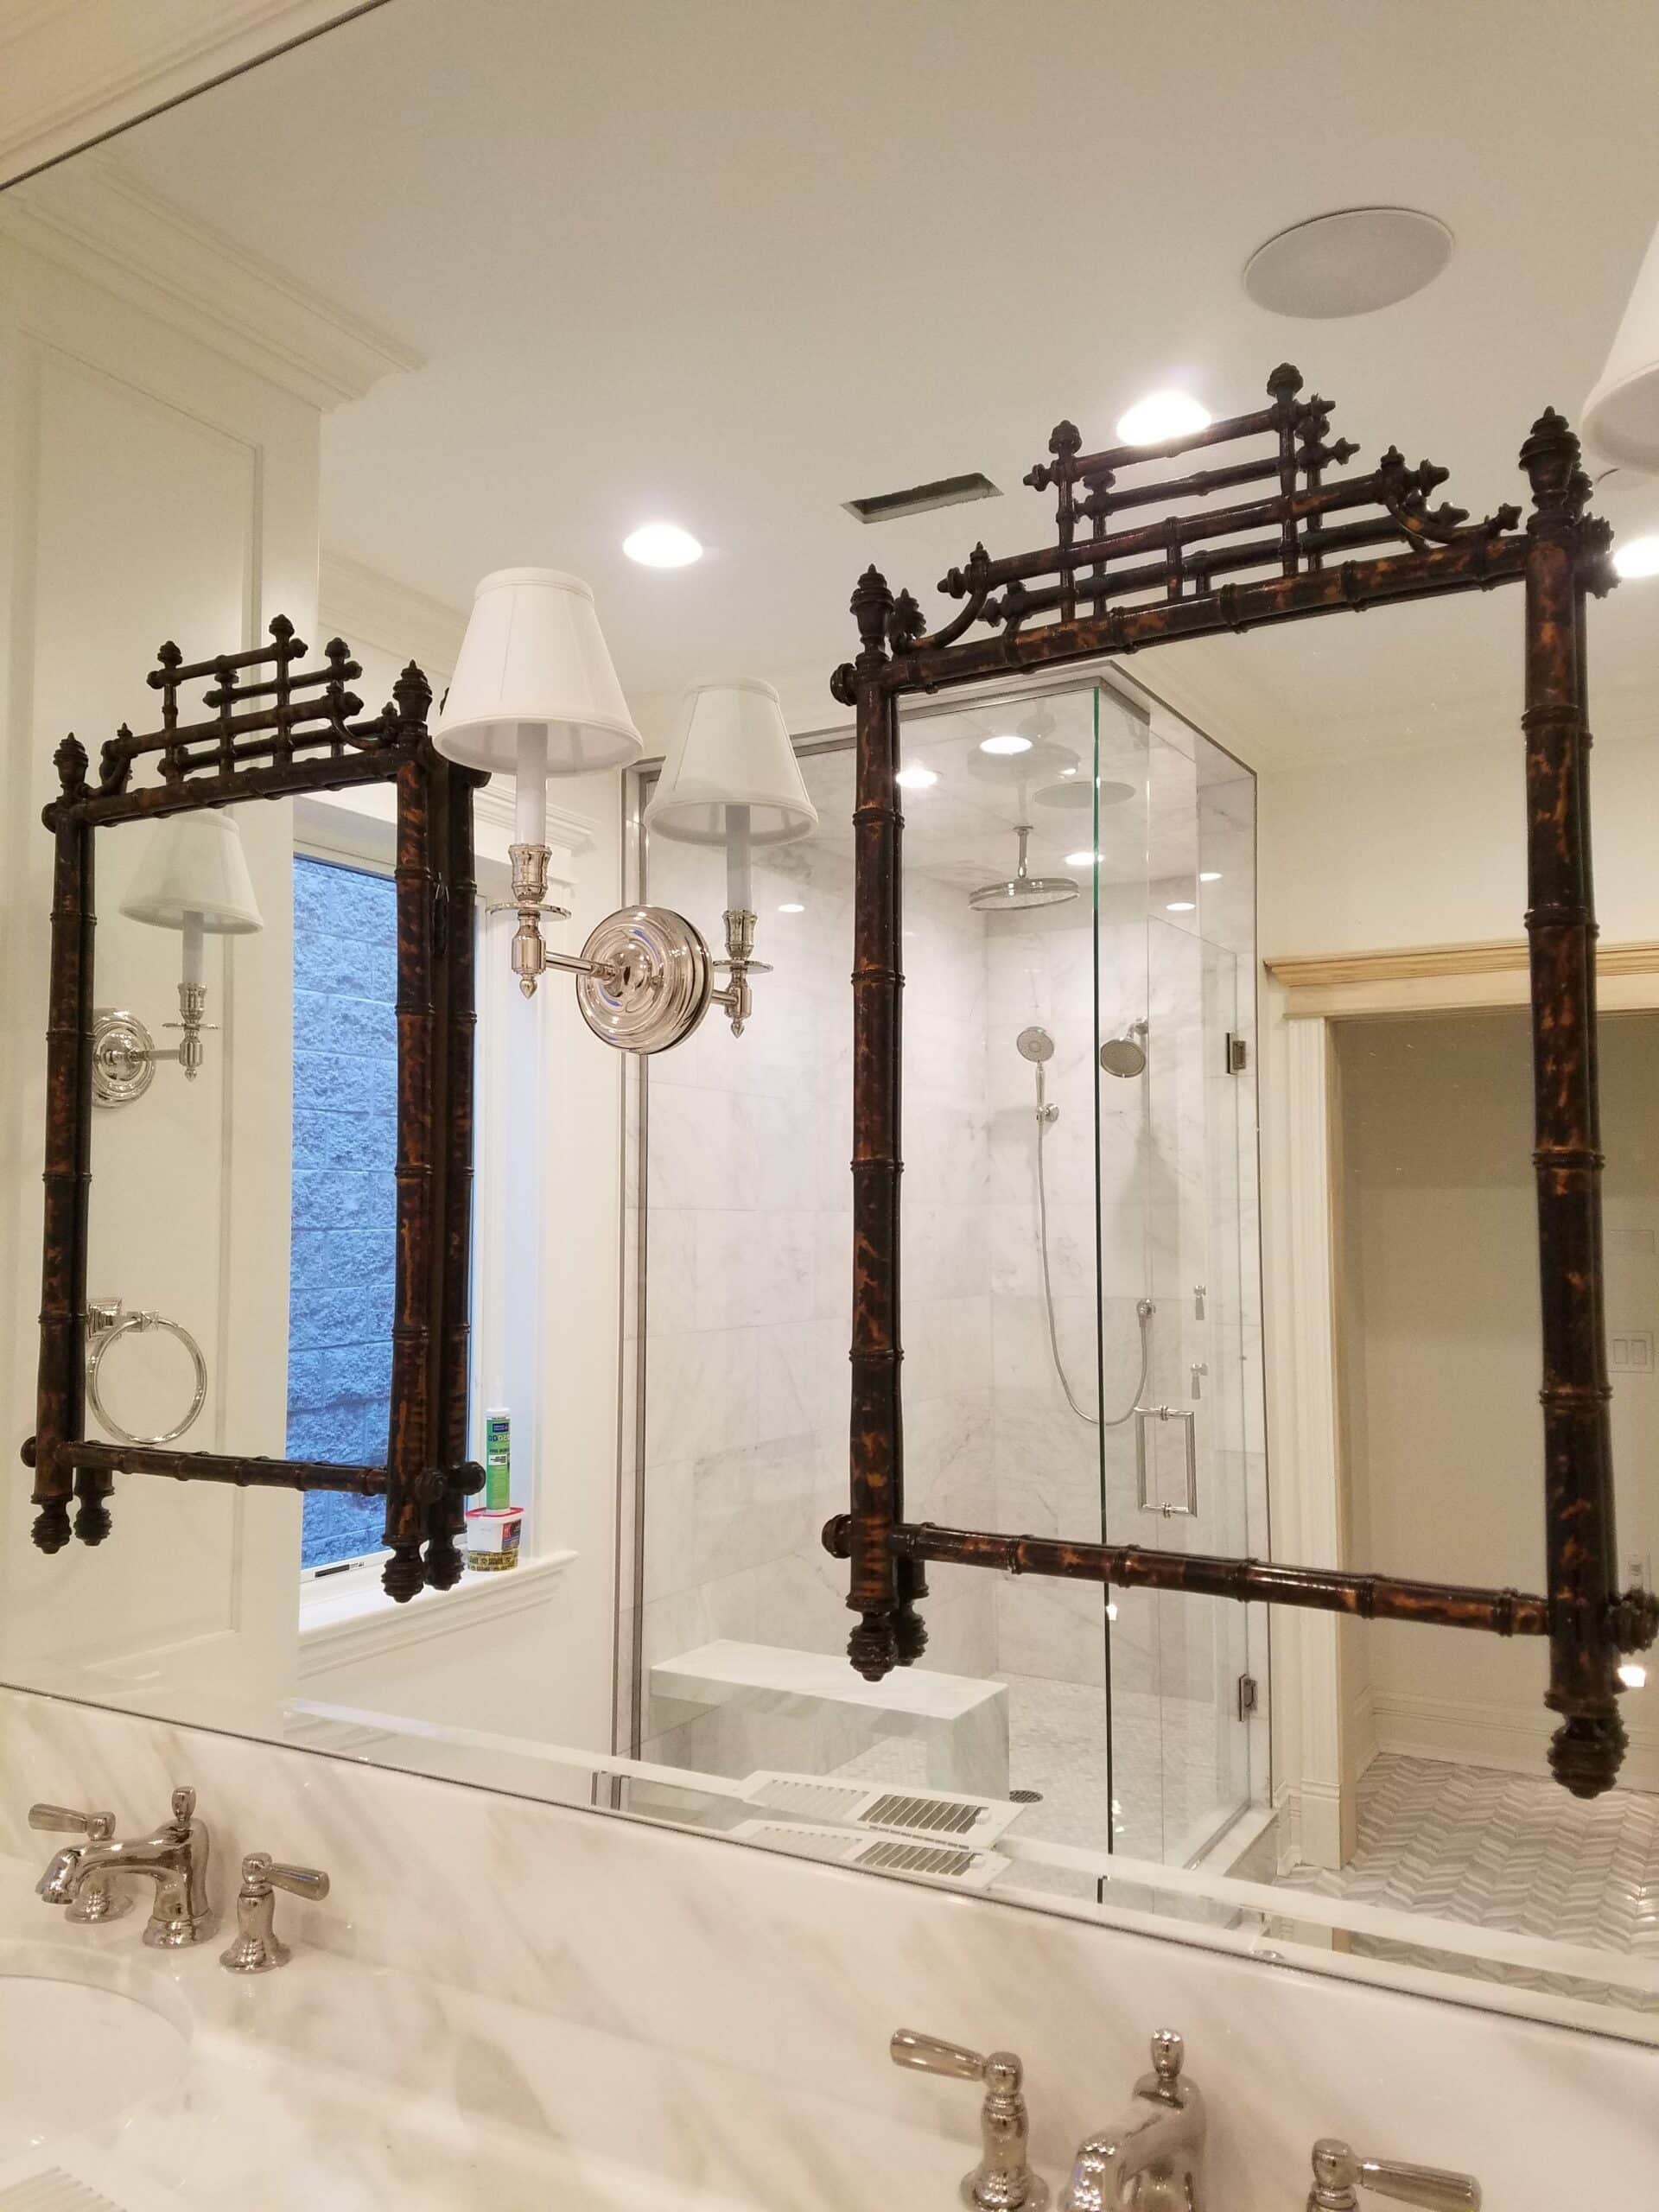 A bathroom redesign in a Chicago home with unique mirror fixtures.